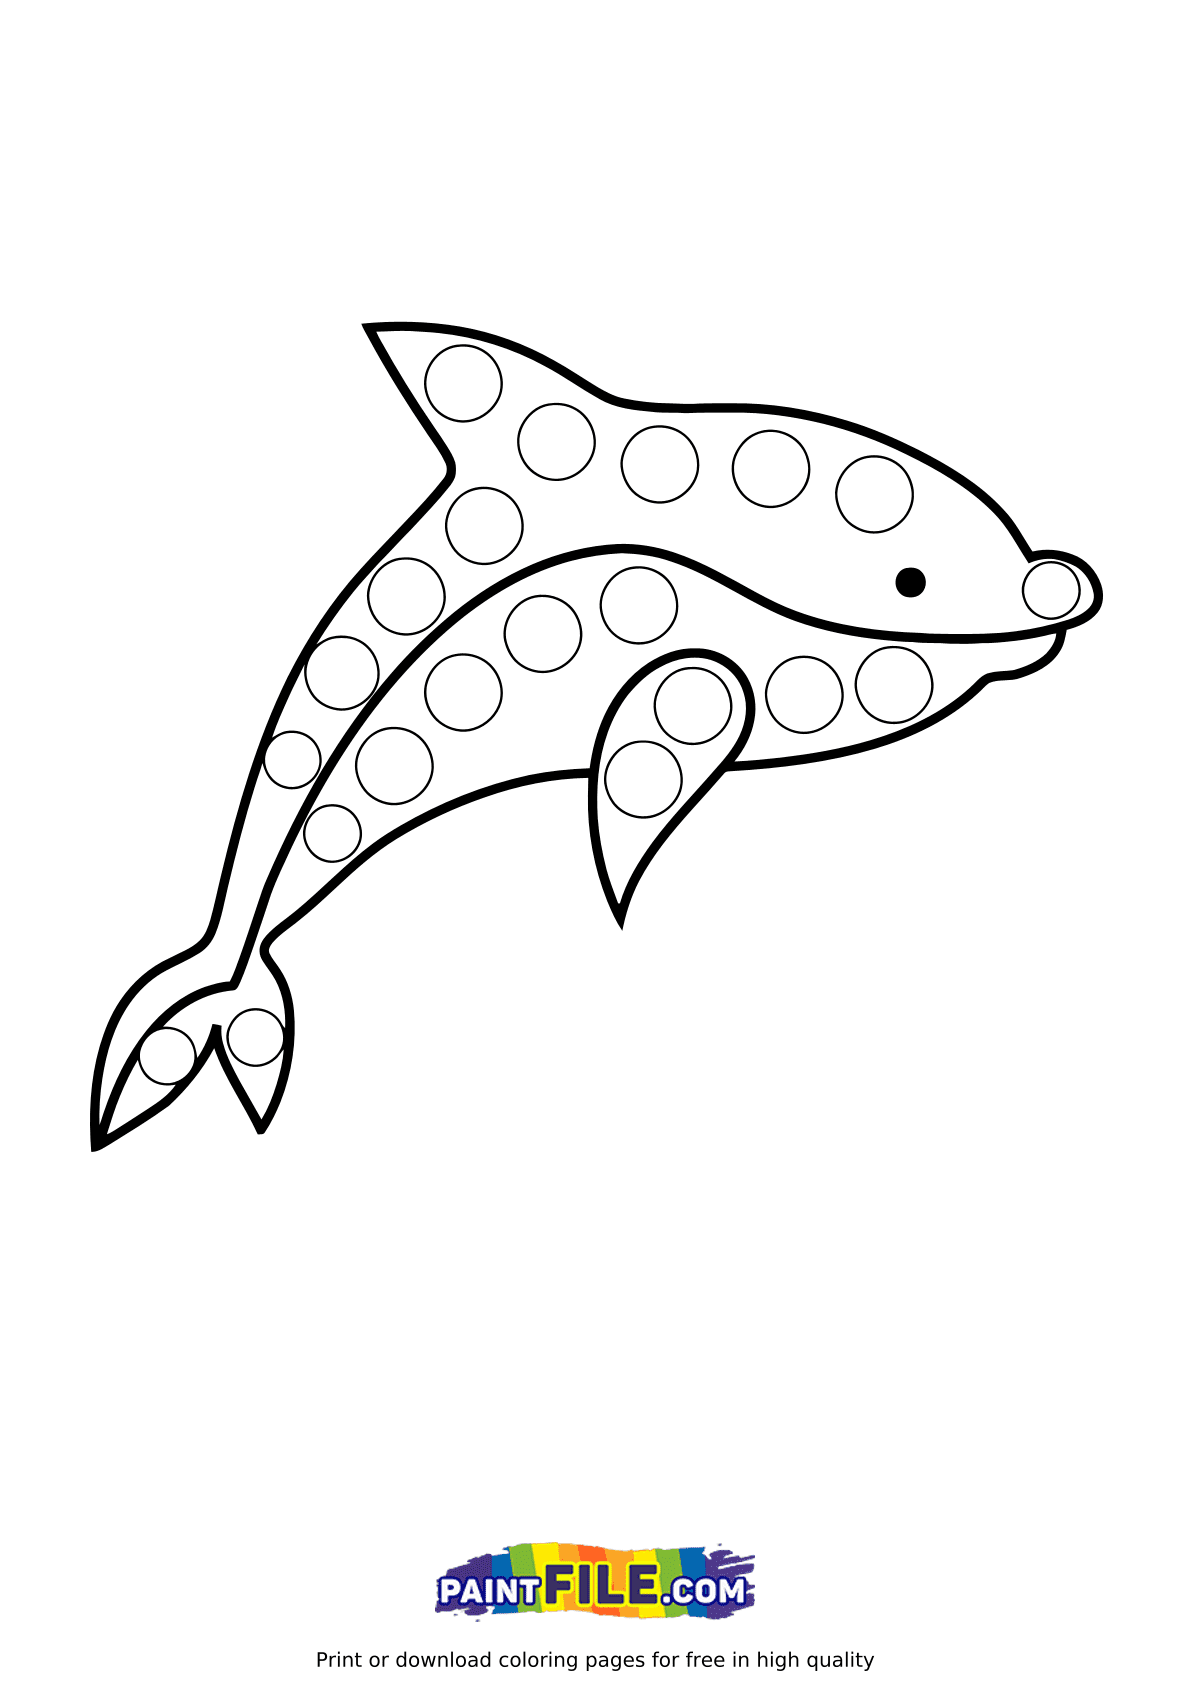 Pop It Dolphin Coloring Pages   Pop It Coloring Pages   Coloring ...